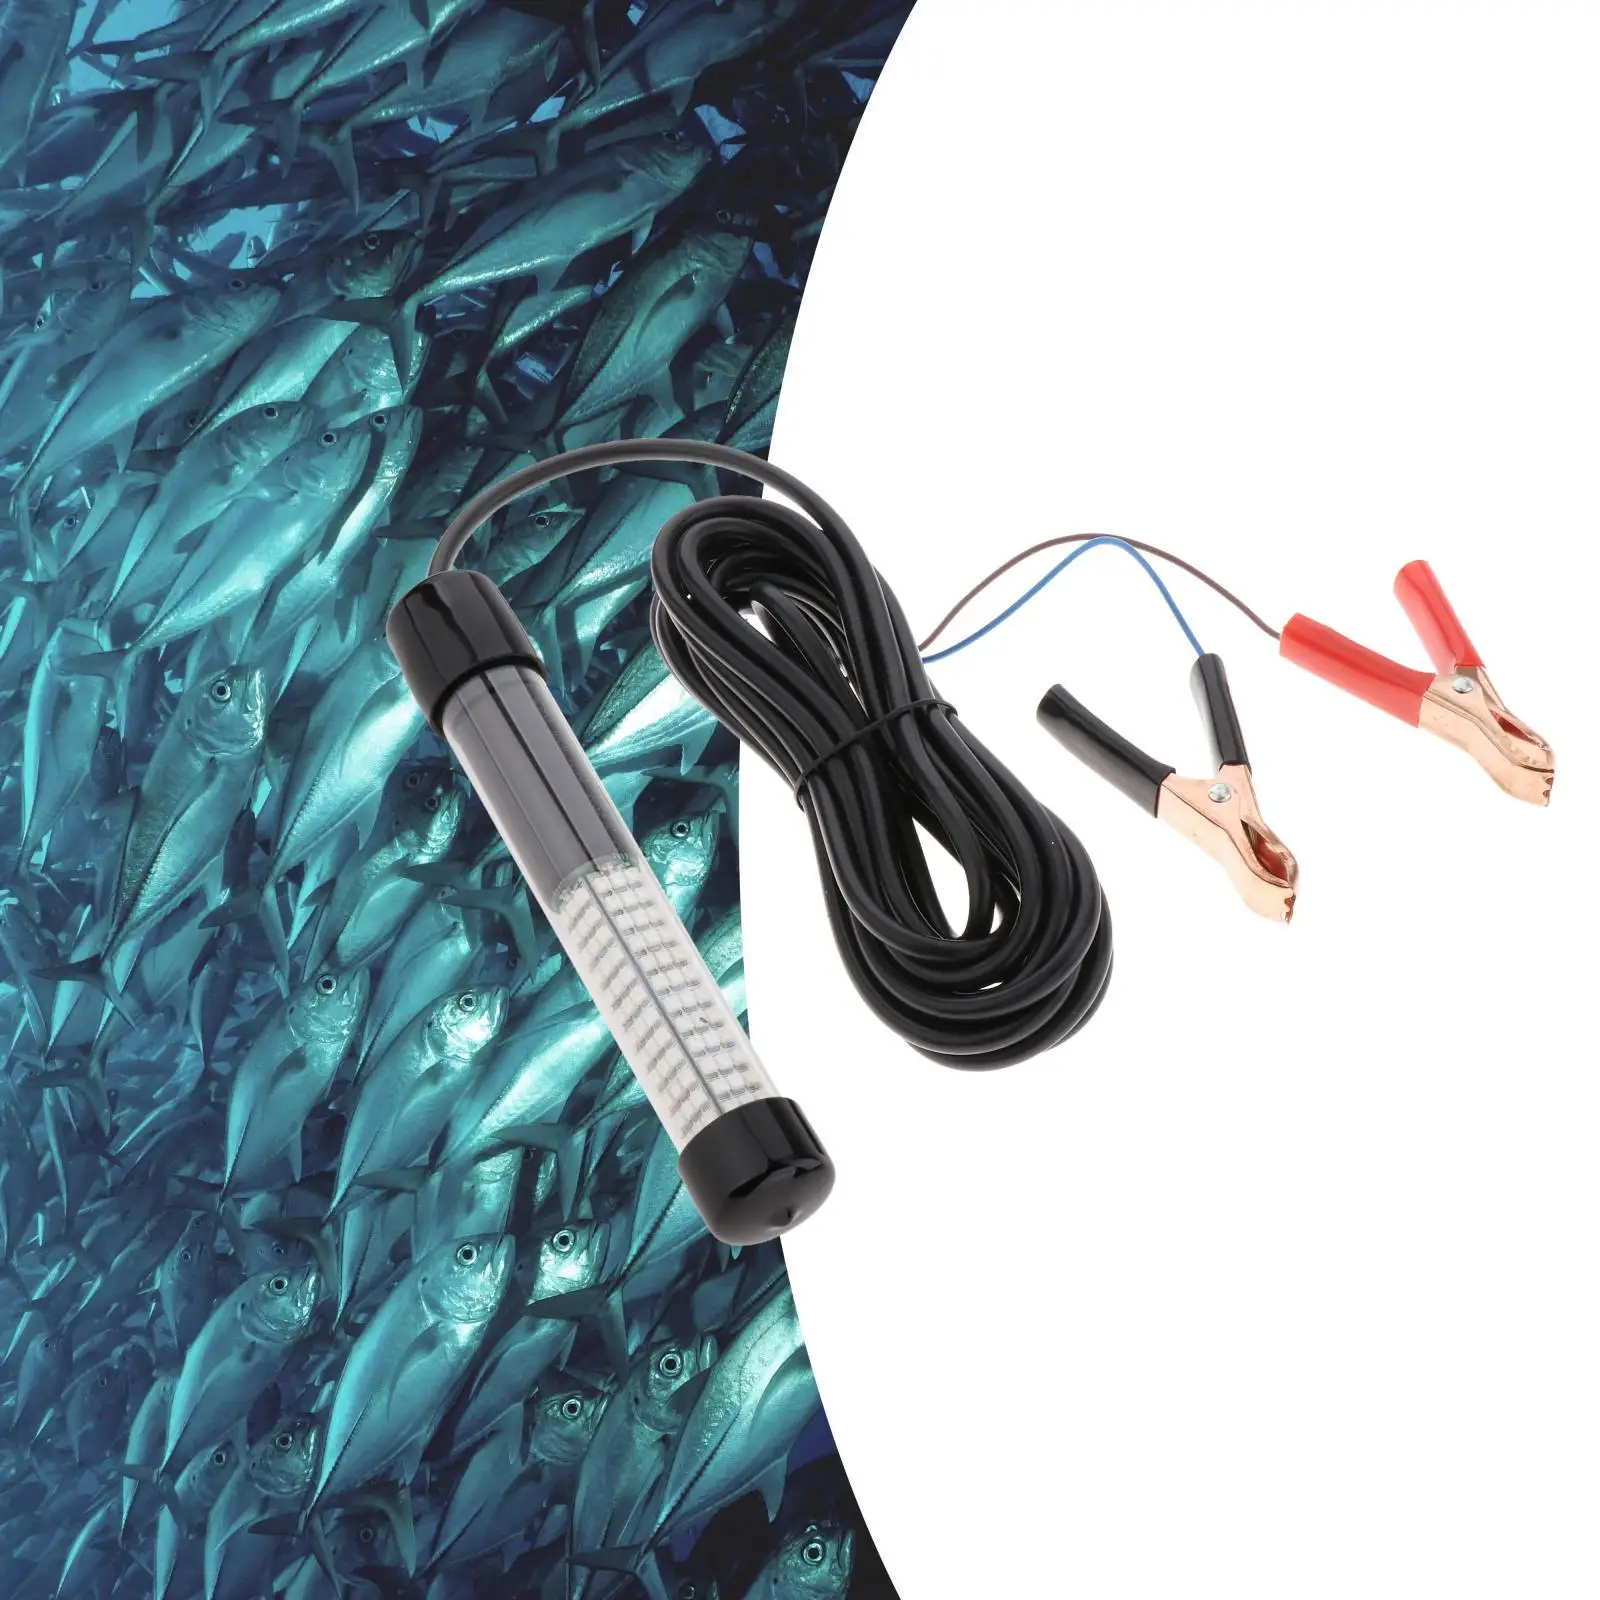 180 LEDs Submersible Fishing Light with 5M Cord Clip Waterproof Outdoor 20W 12V Crappie Sea Saltwater Freshwater Ice Fishing